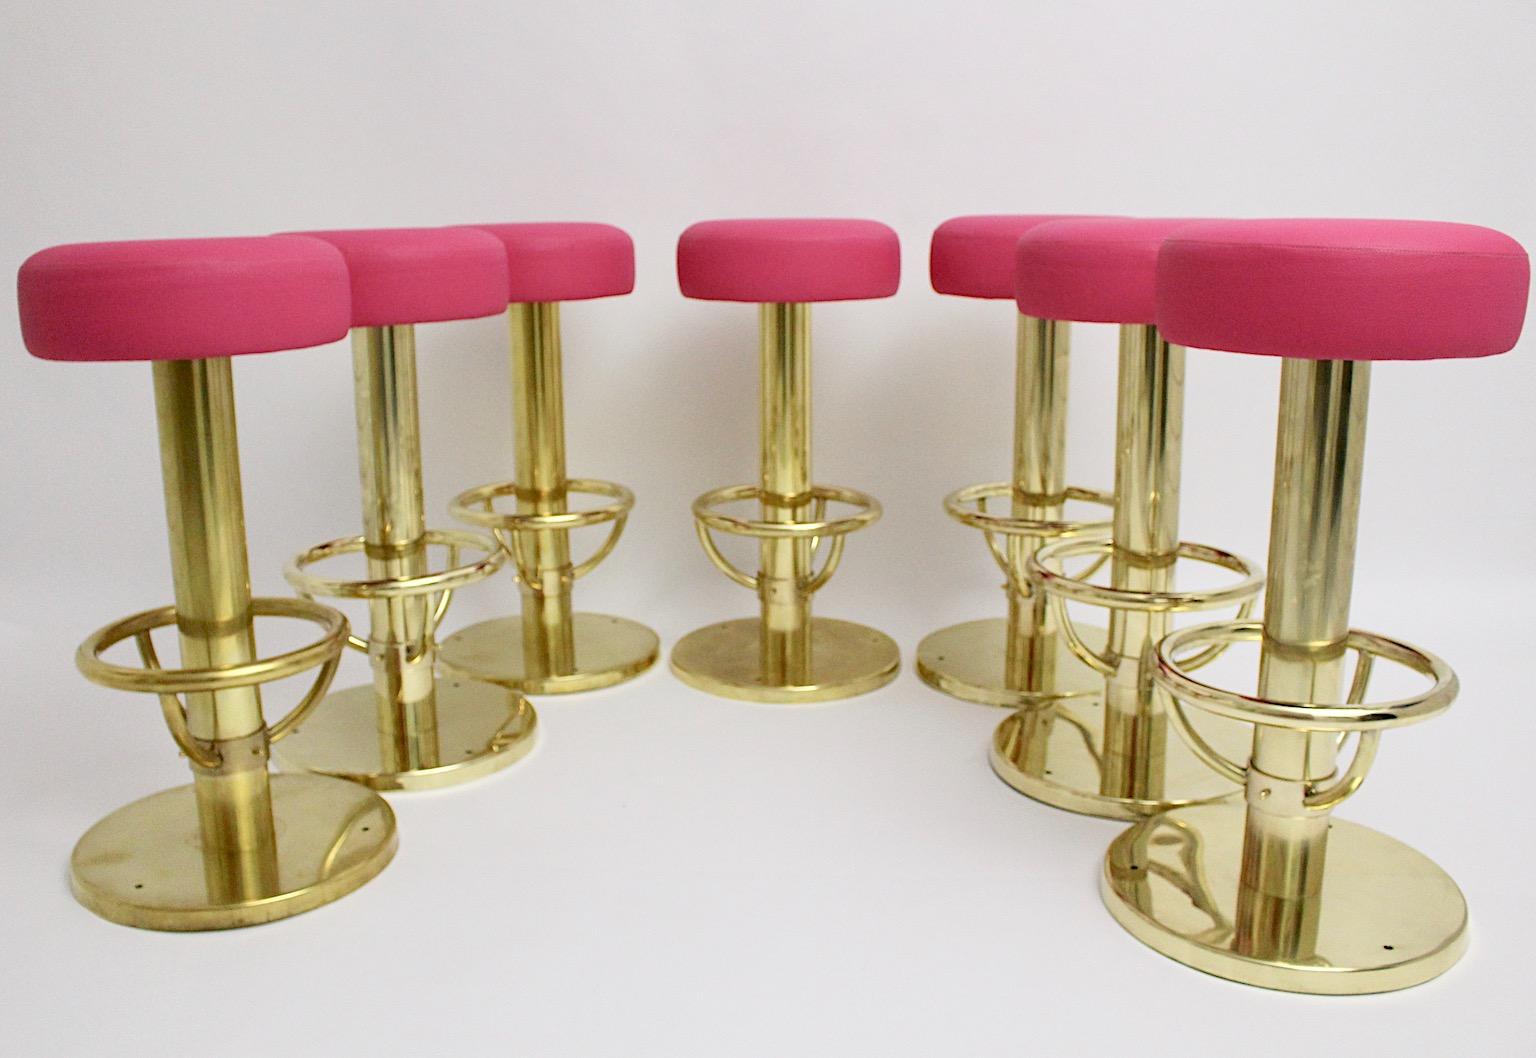 Mid-Century Modern vintage up to seven bar stools designed 1960s Austria from solid brass and faux leather in bold pink color tone.
The brass frame was polished some times ago and get character in the meantime by beautiful brass patina, which is